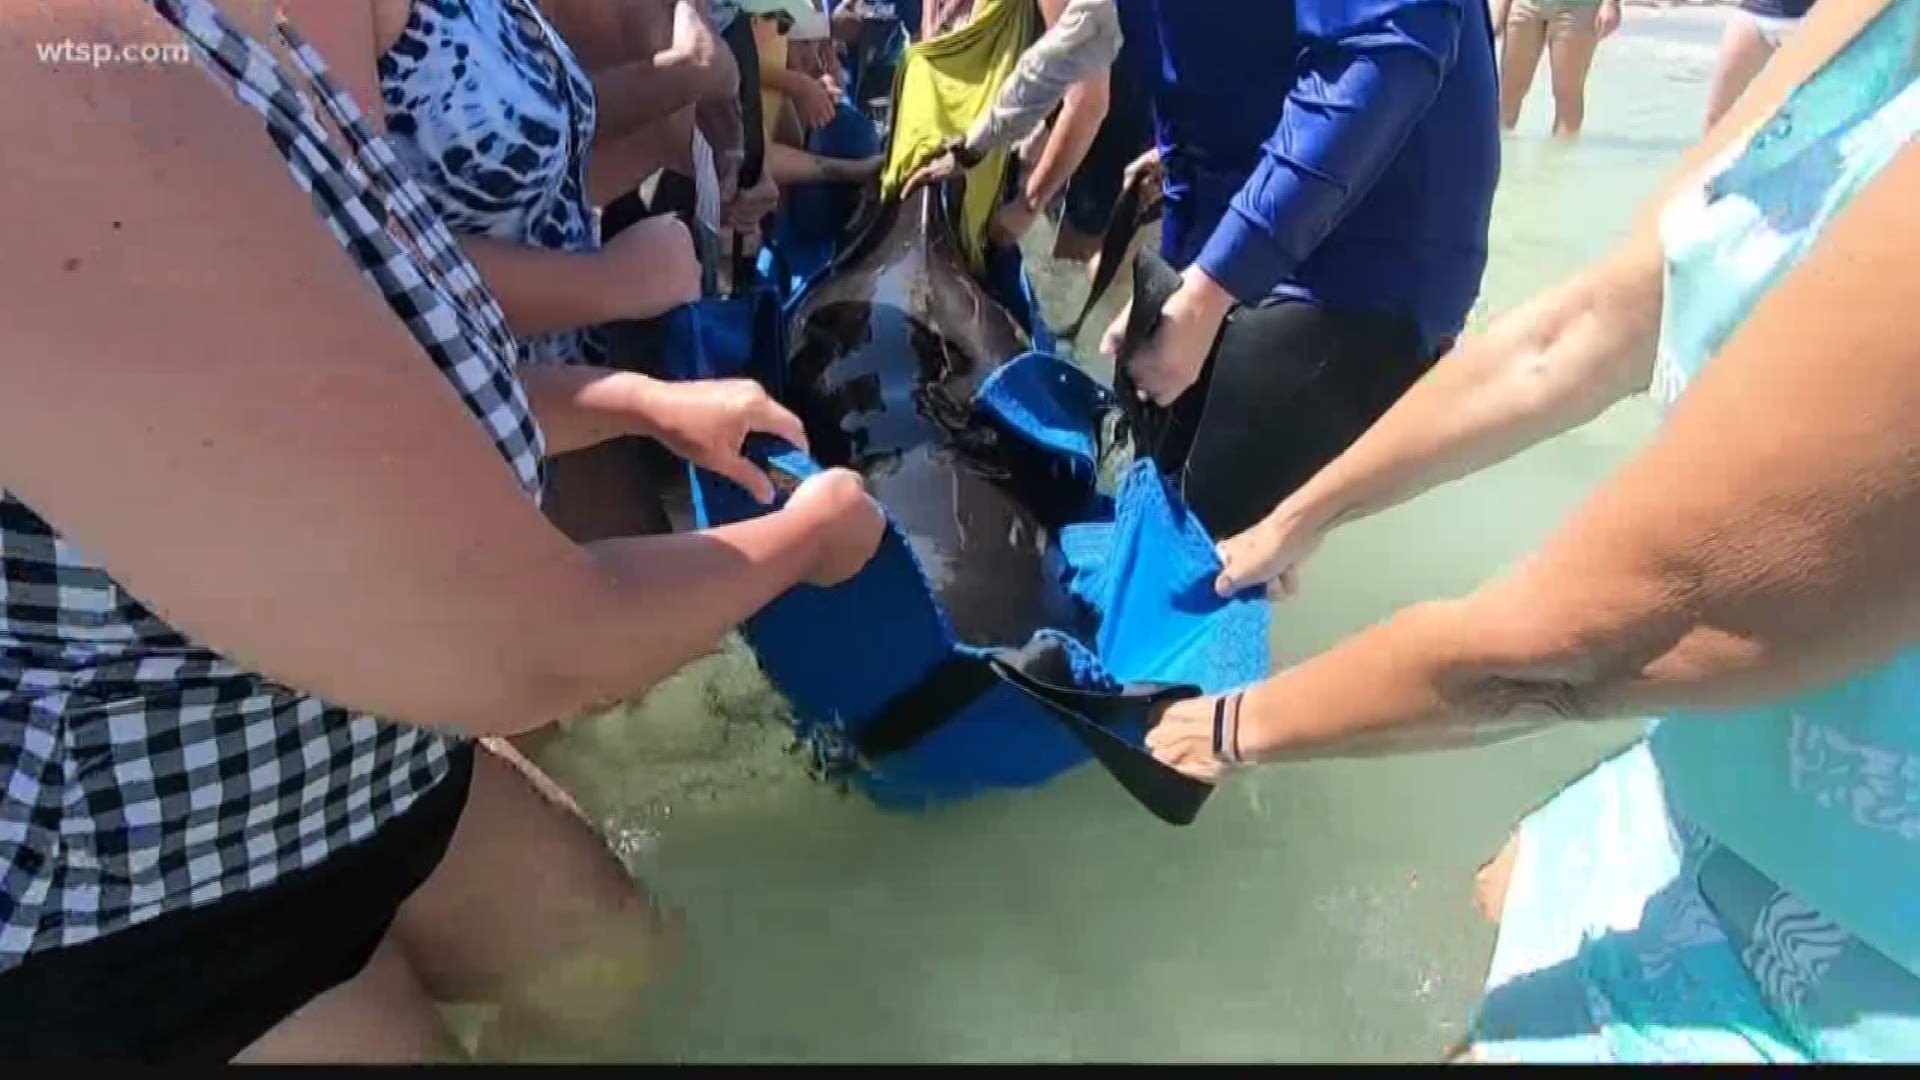 Pinellas County deputies are working with Clearwater Marine Aquarium to help five pilot whales stranded on Redington Beach.

Deputies say the five distressed whales appear to have beached themselves. The sheriff's office and the aquarium have set up tents in the water to cover the whales while aquarium staff and crews from Florida Fish and Wildlife and NOAA Fisheries help the whales. https://on.wtsp.com/2GvKeZV